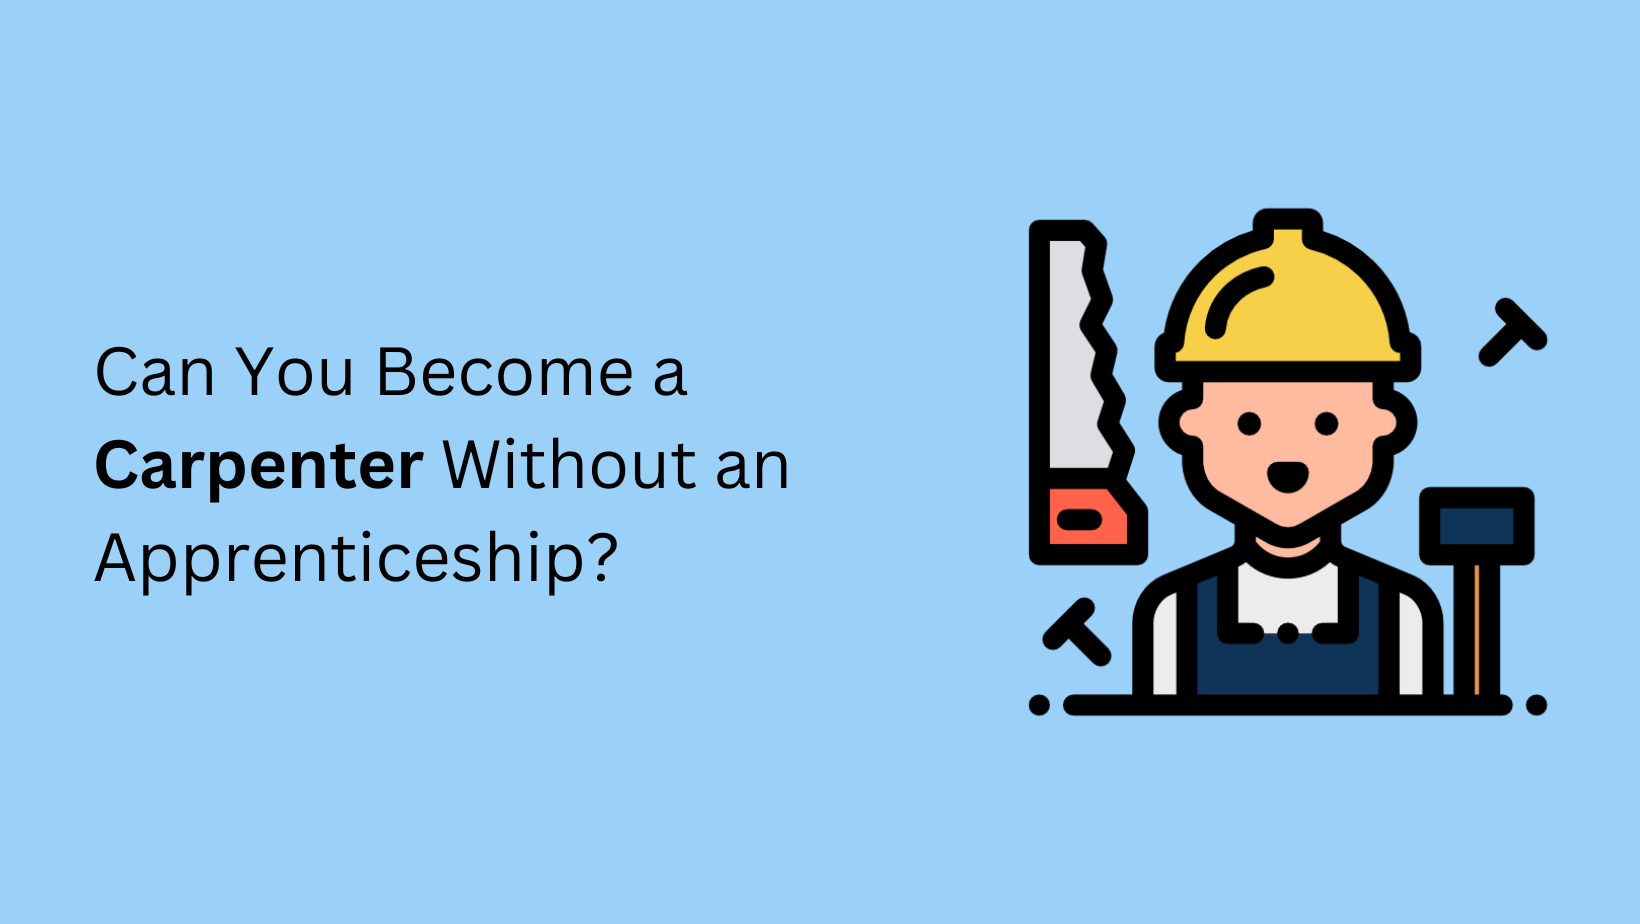 Can You Become a Carpenter Without an Apprenticeship